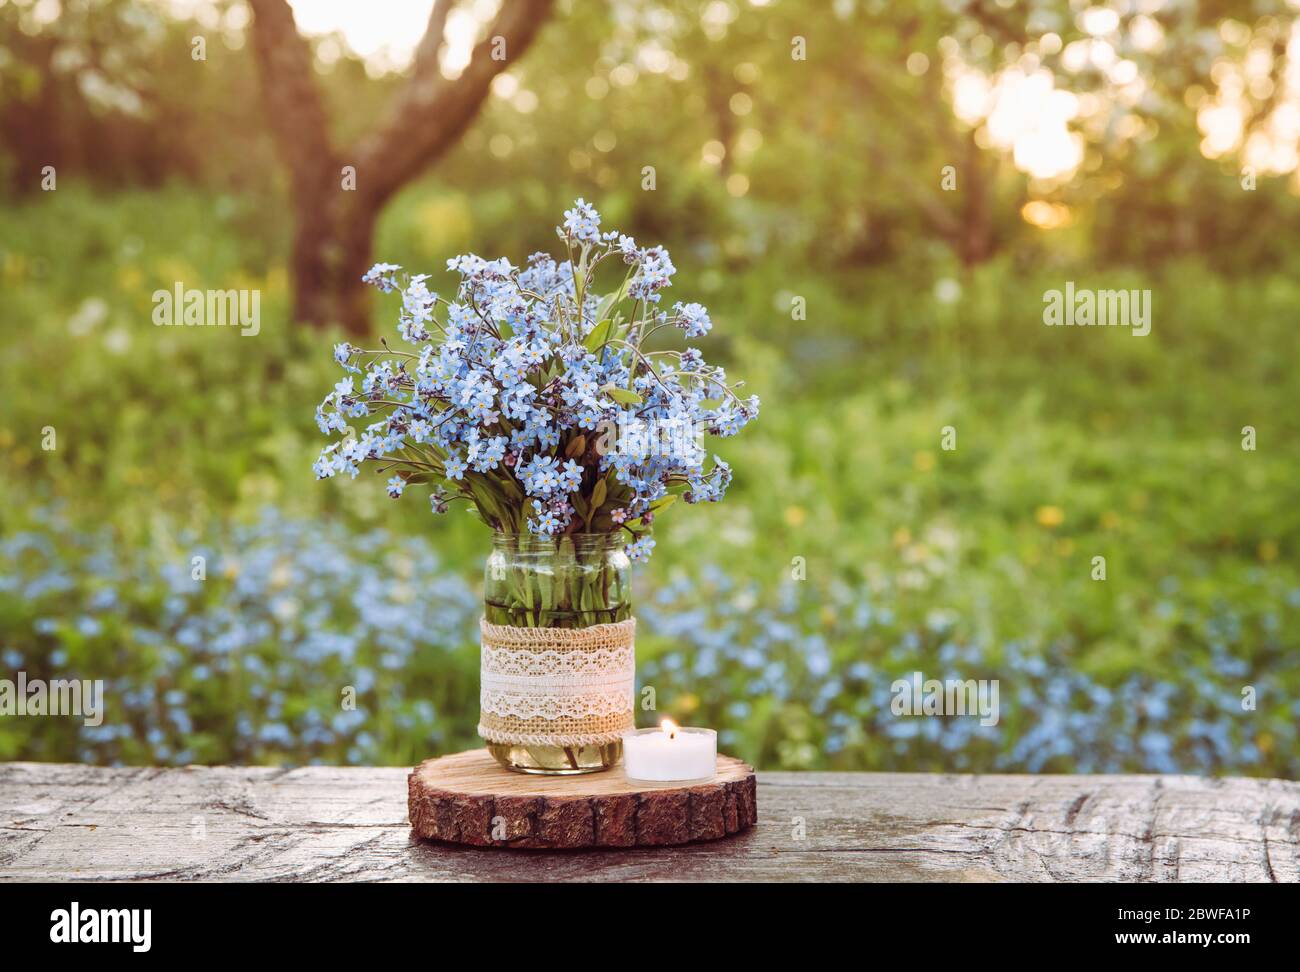 Bouquet of wild flowers Myosotis also known as Forget me not s or scorpion grasses in lace burlap cloth decorated baby food jar. Inexpensive vintage p Stock Photo